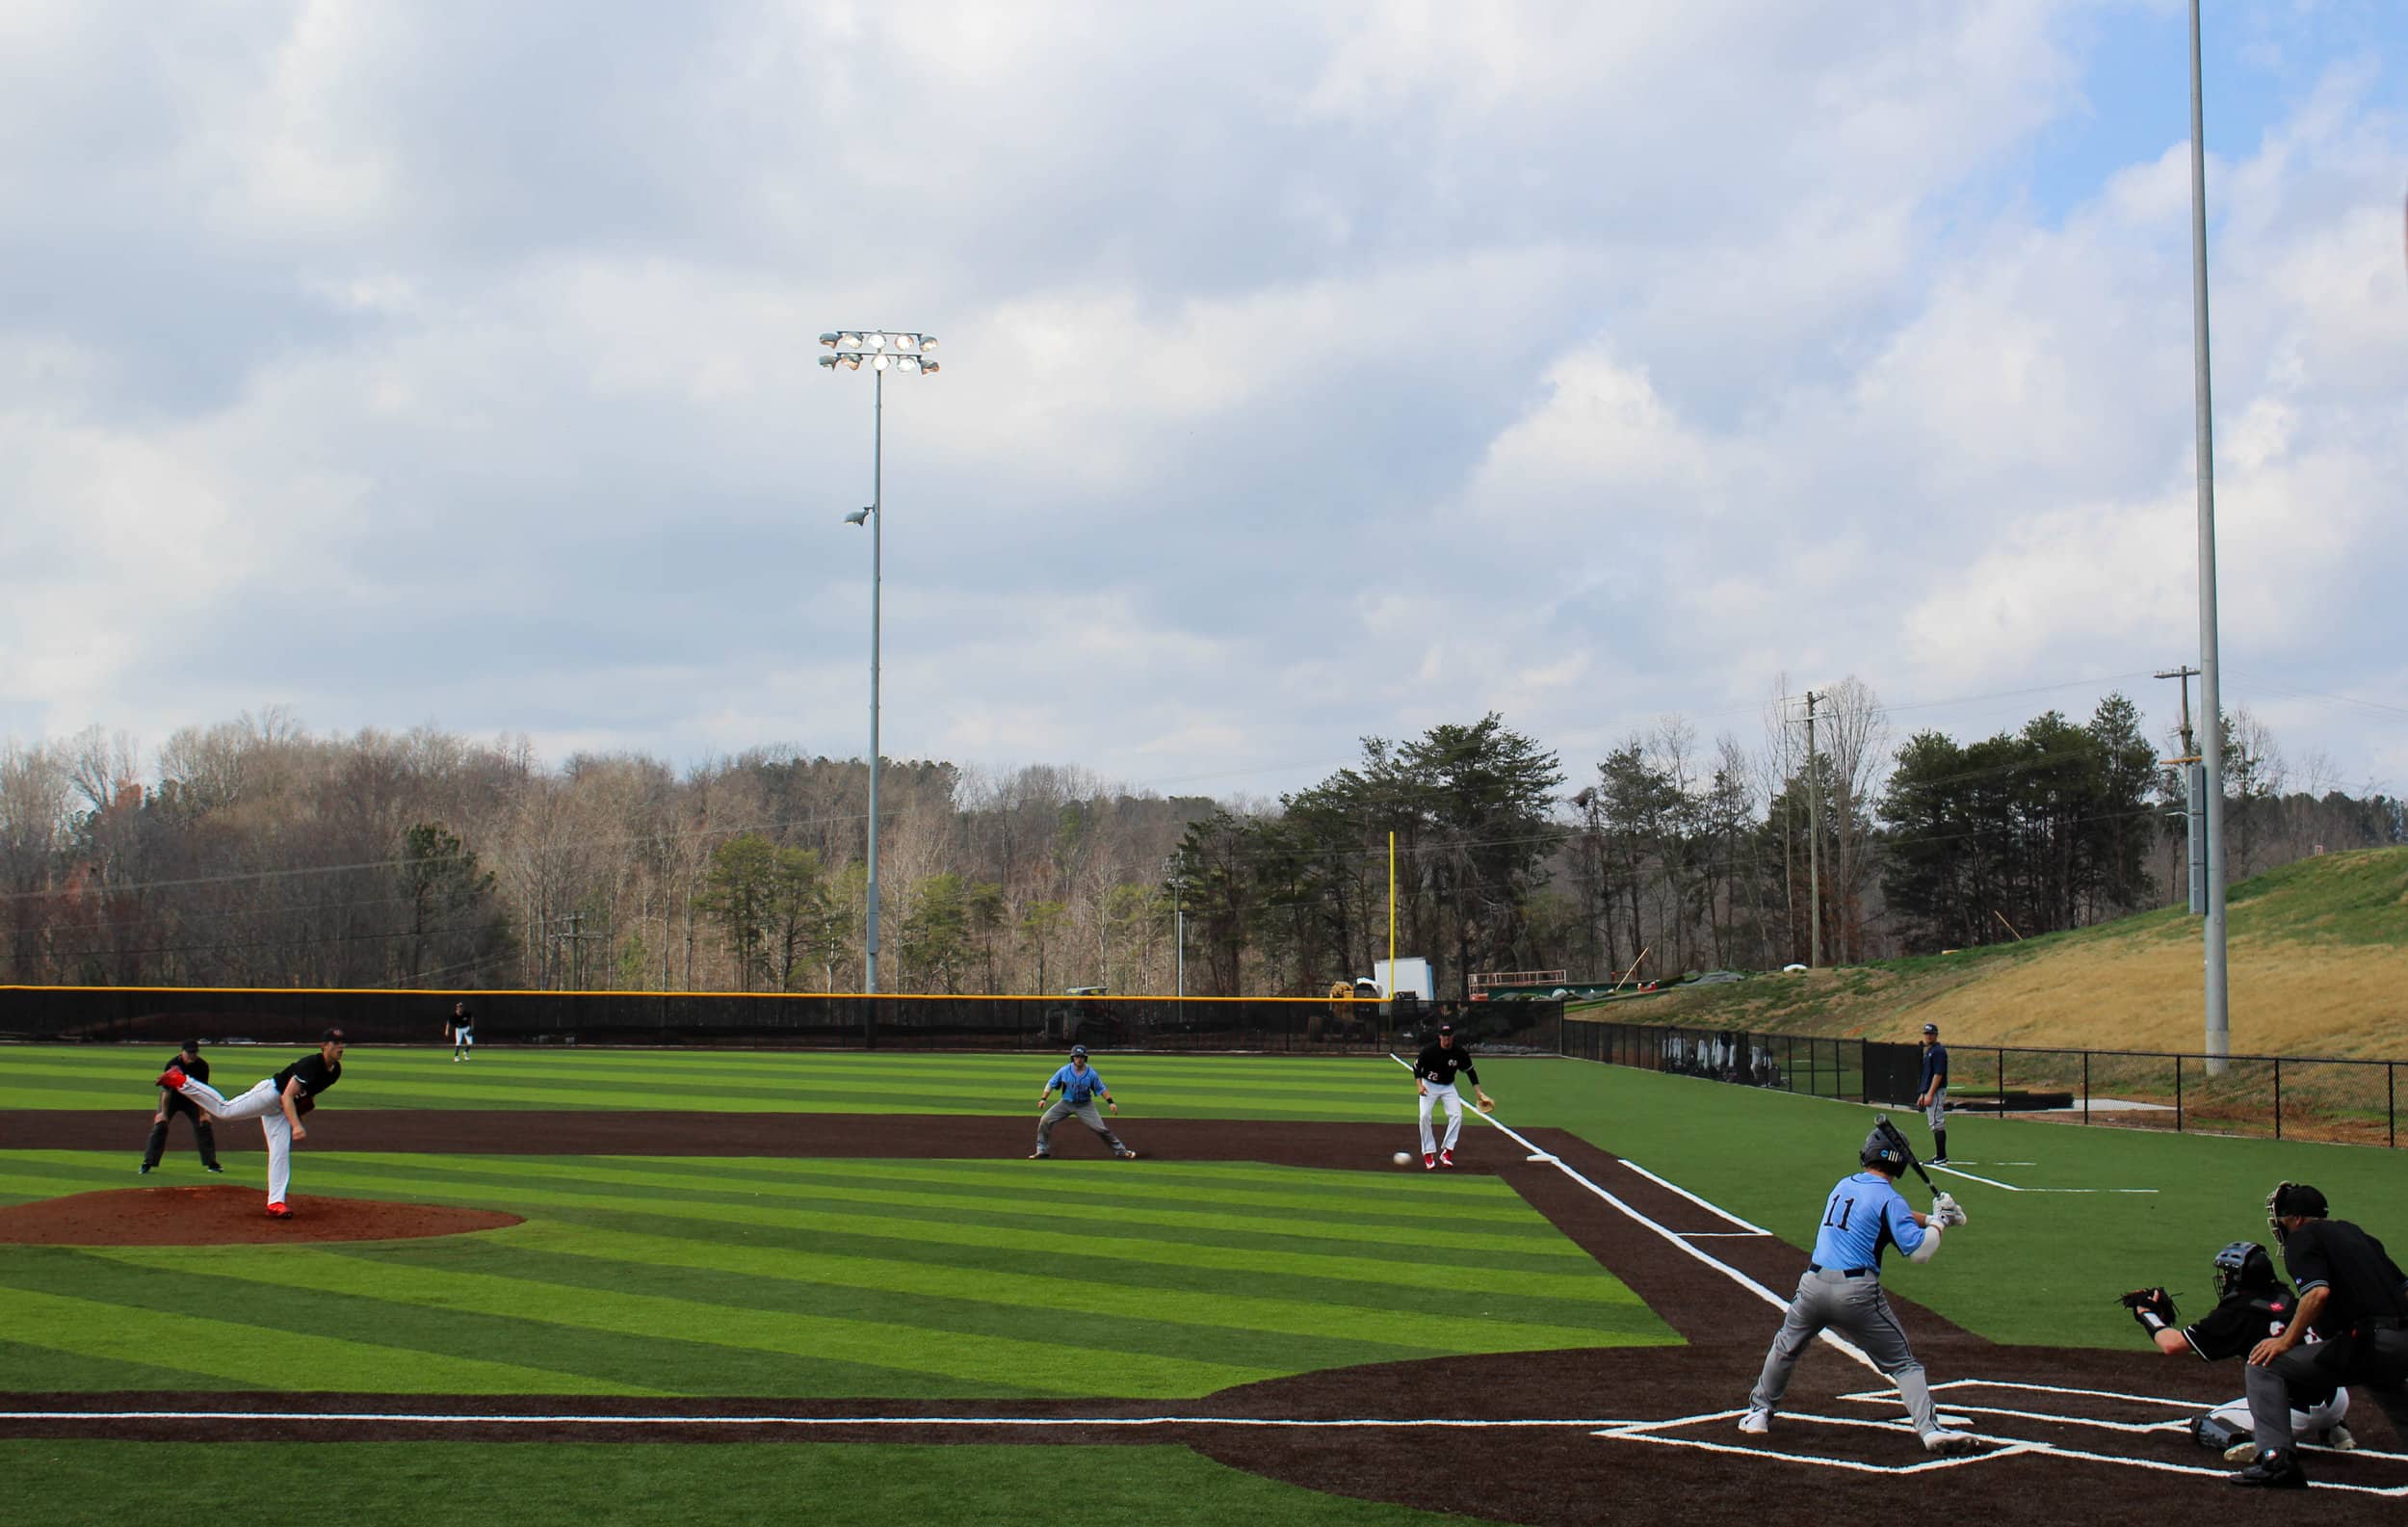 Ethan Garner (27) pitches the baseball while a right handed batter from NU is up to bat.